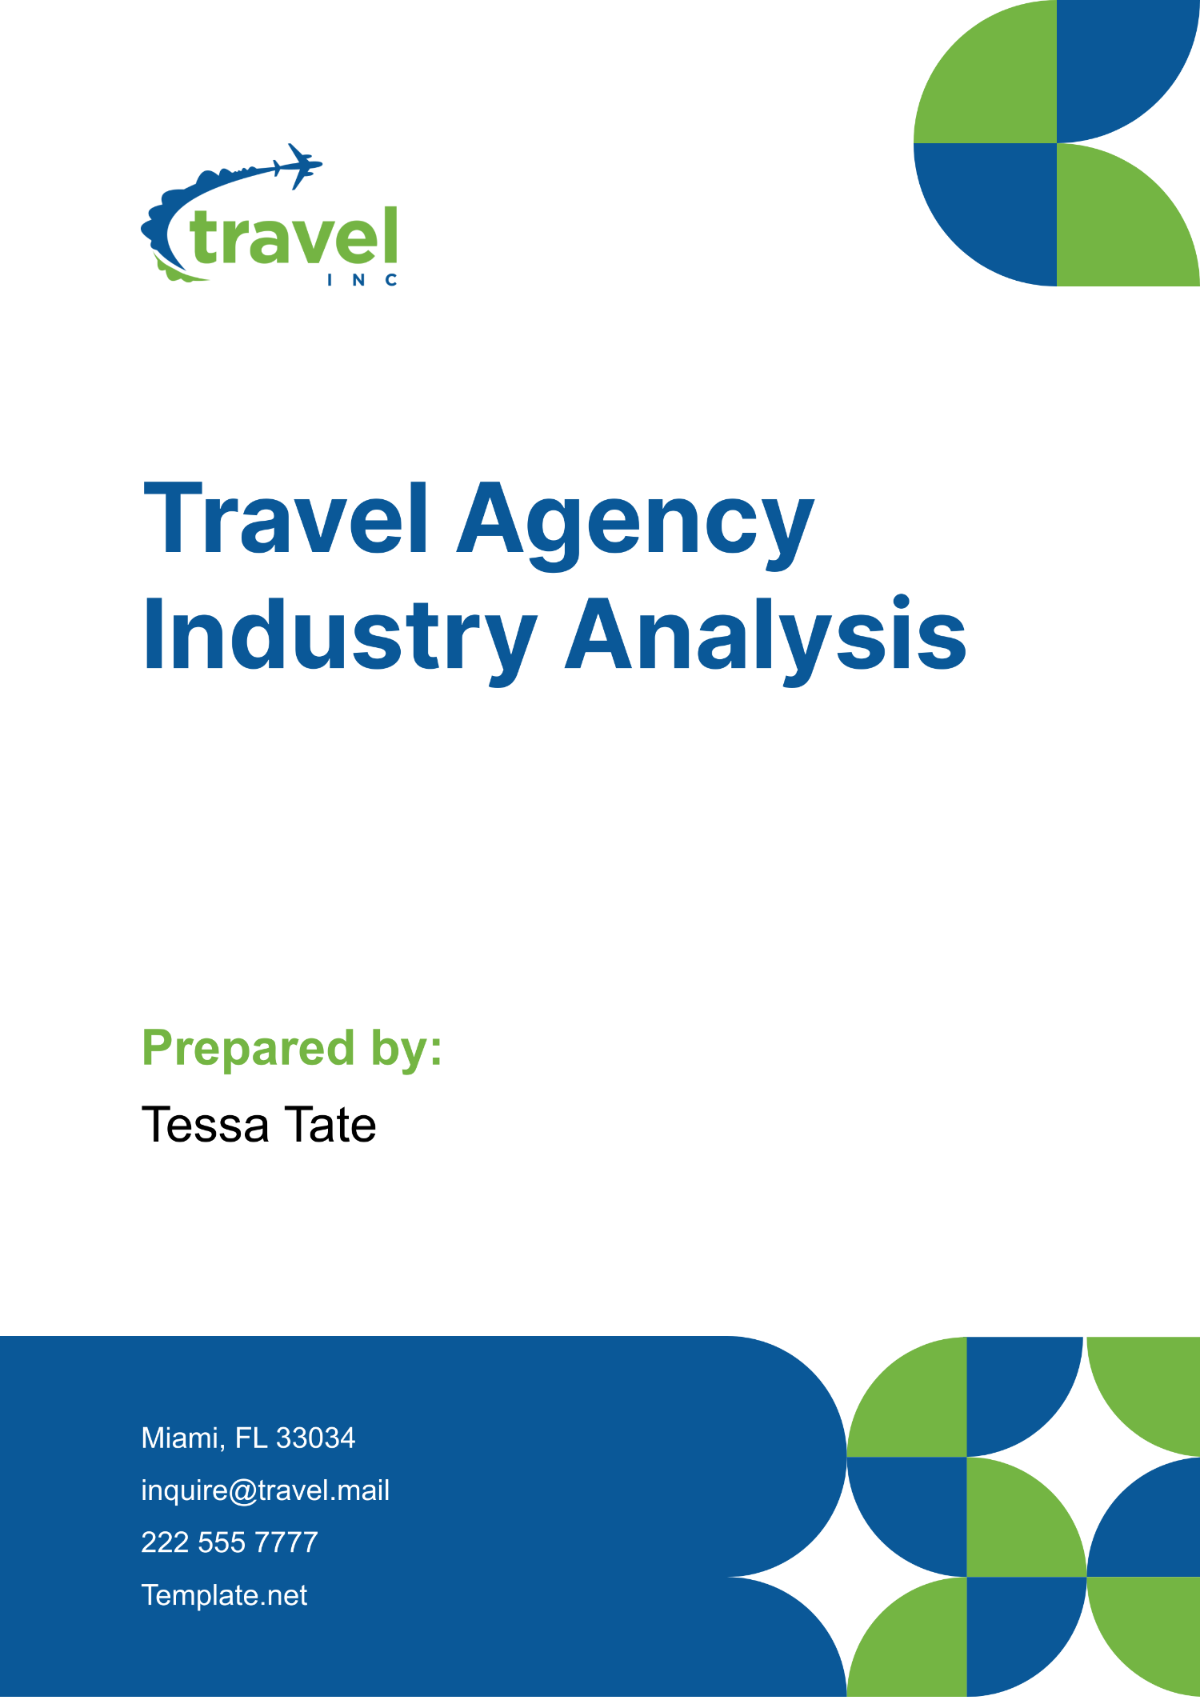 Travel Agency Industry Analysis Template